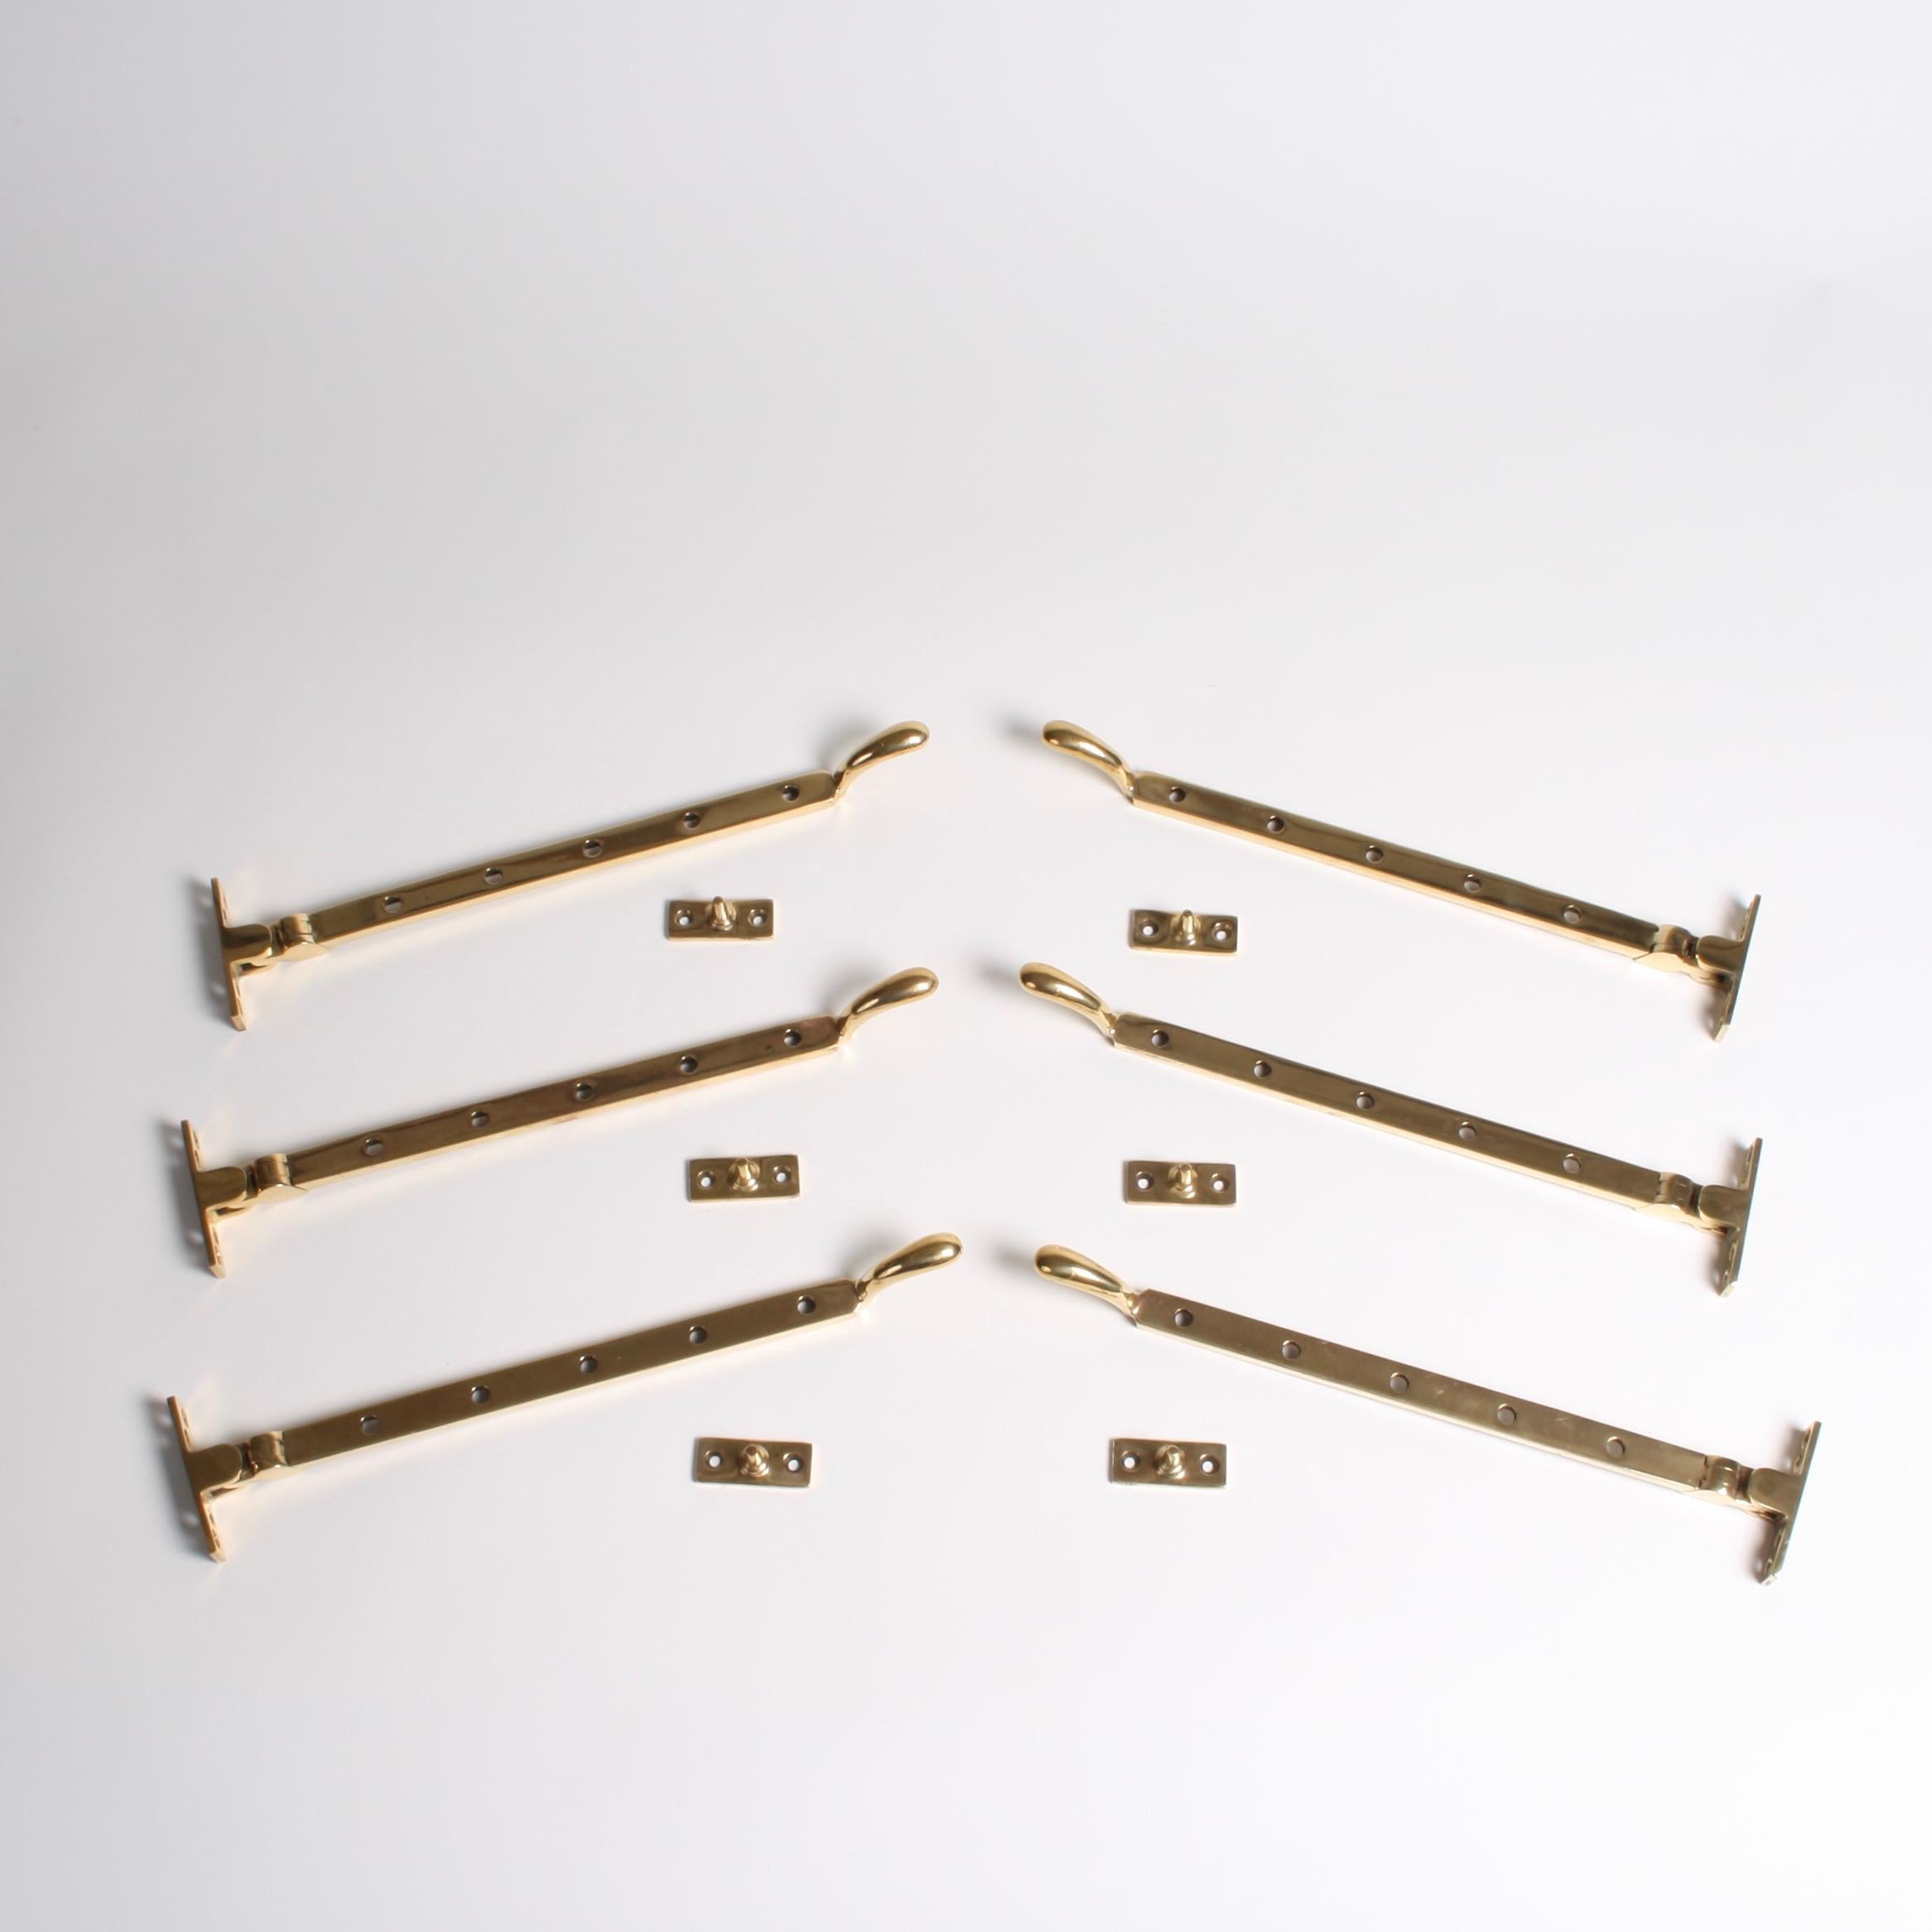 A run of six Art Deco brass casement widow stays each with a matching pins.

Each stay has 5 holes for adjustment of the angle of the window.

The back of each stay is marked W R.

Length of each stay: 32 cm.

4 extra pins included with this